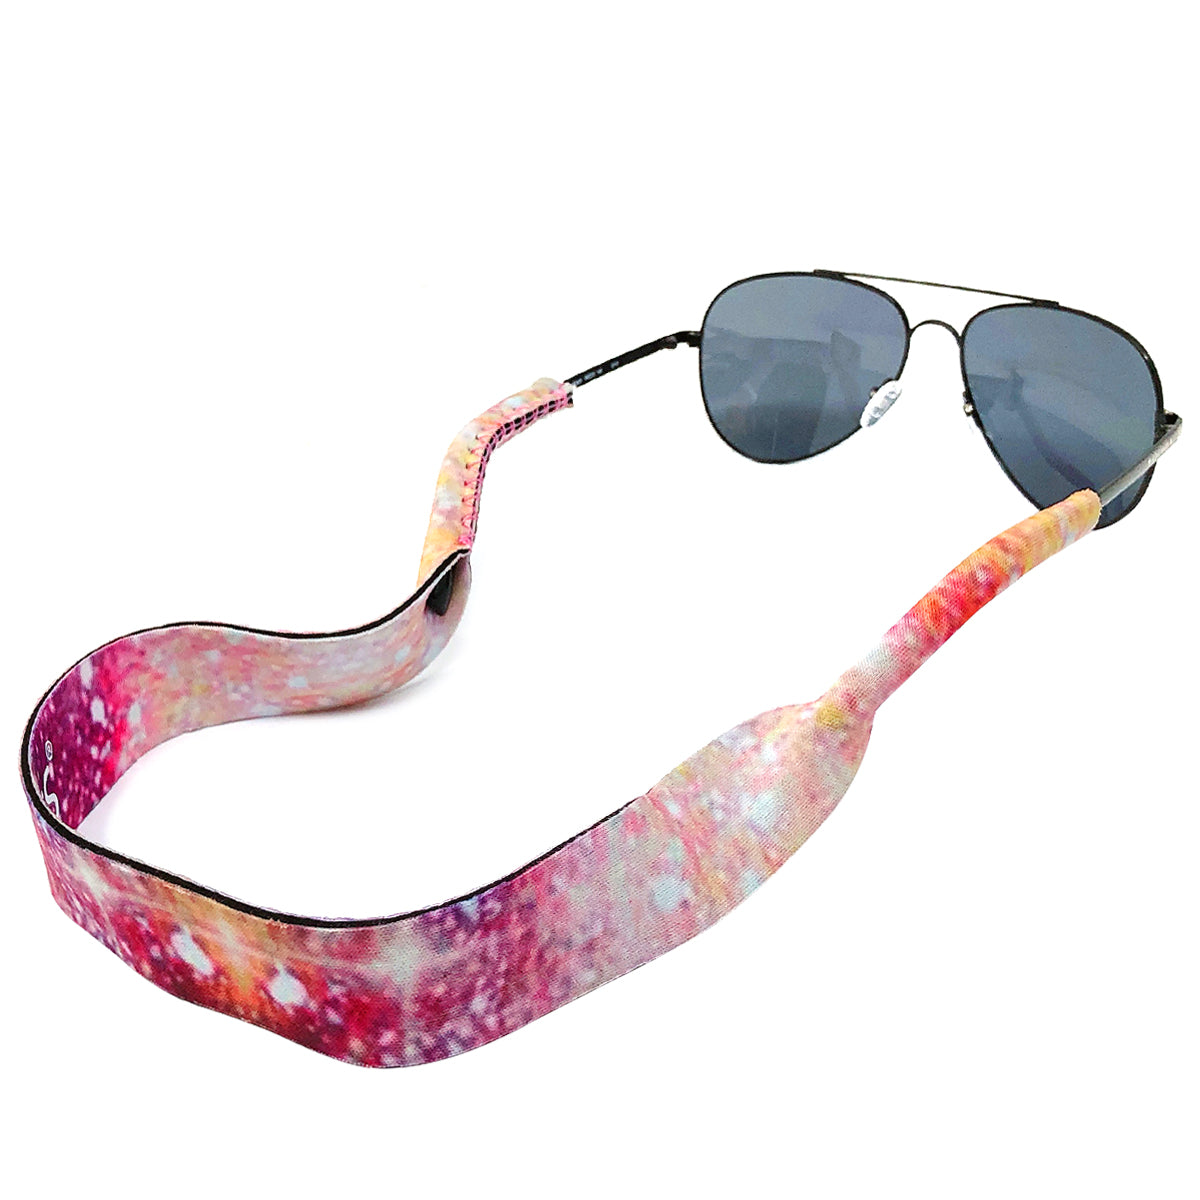 Wrapables Adjustable Eyewear Retainer, Sunglass Strap with Neoprene Floating Material for Sports and Outdoors Pink Galaxy